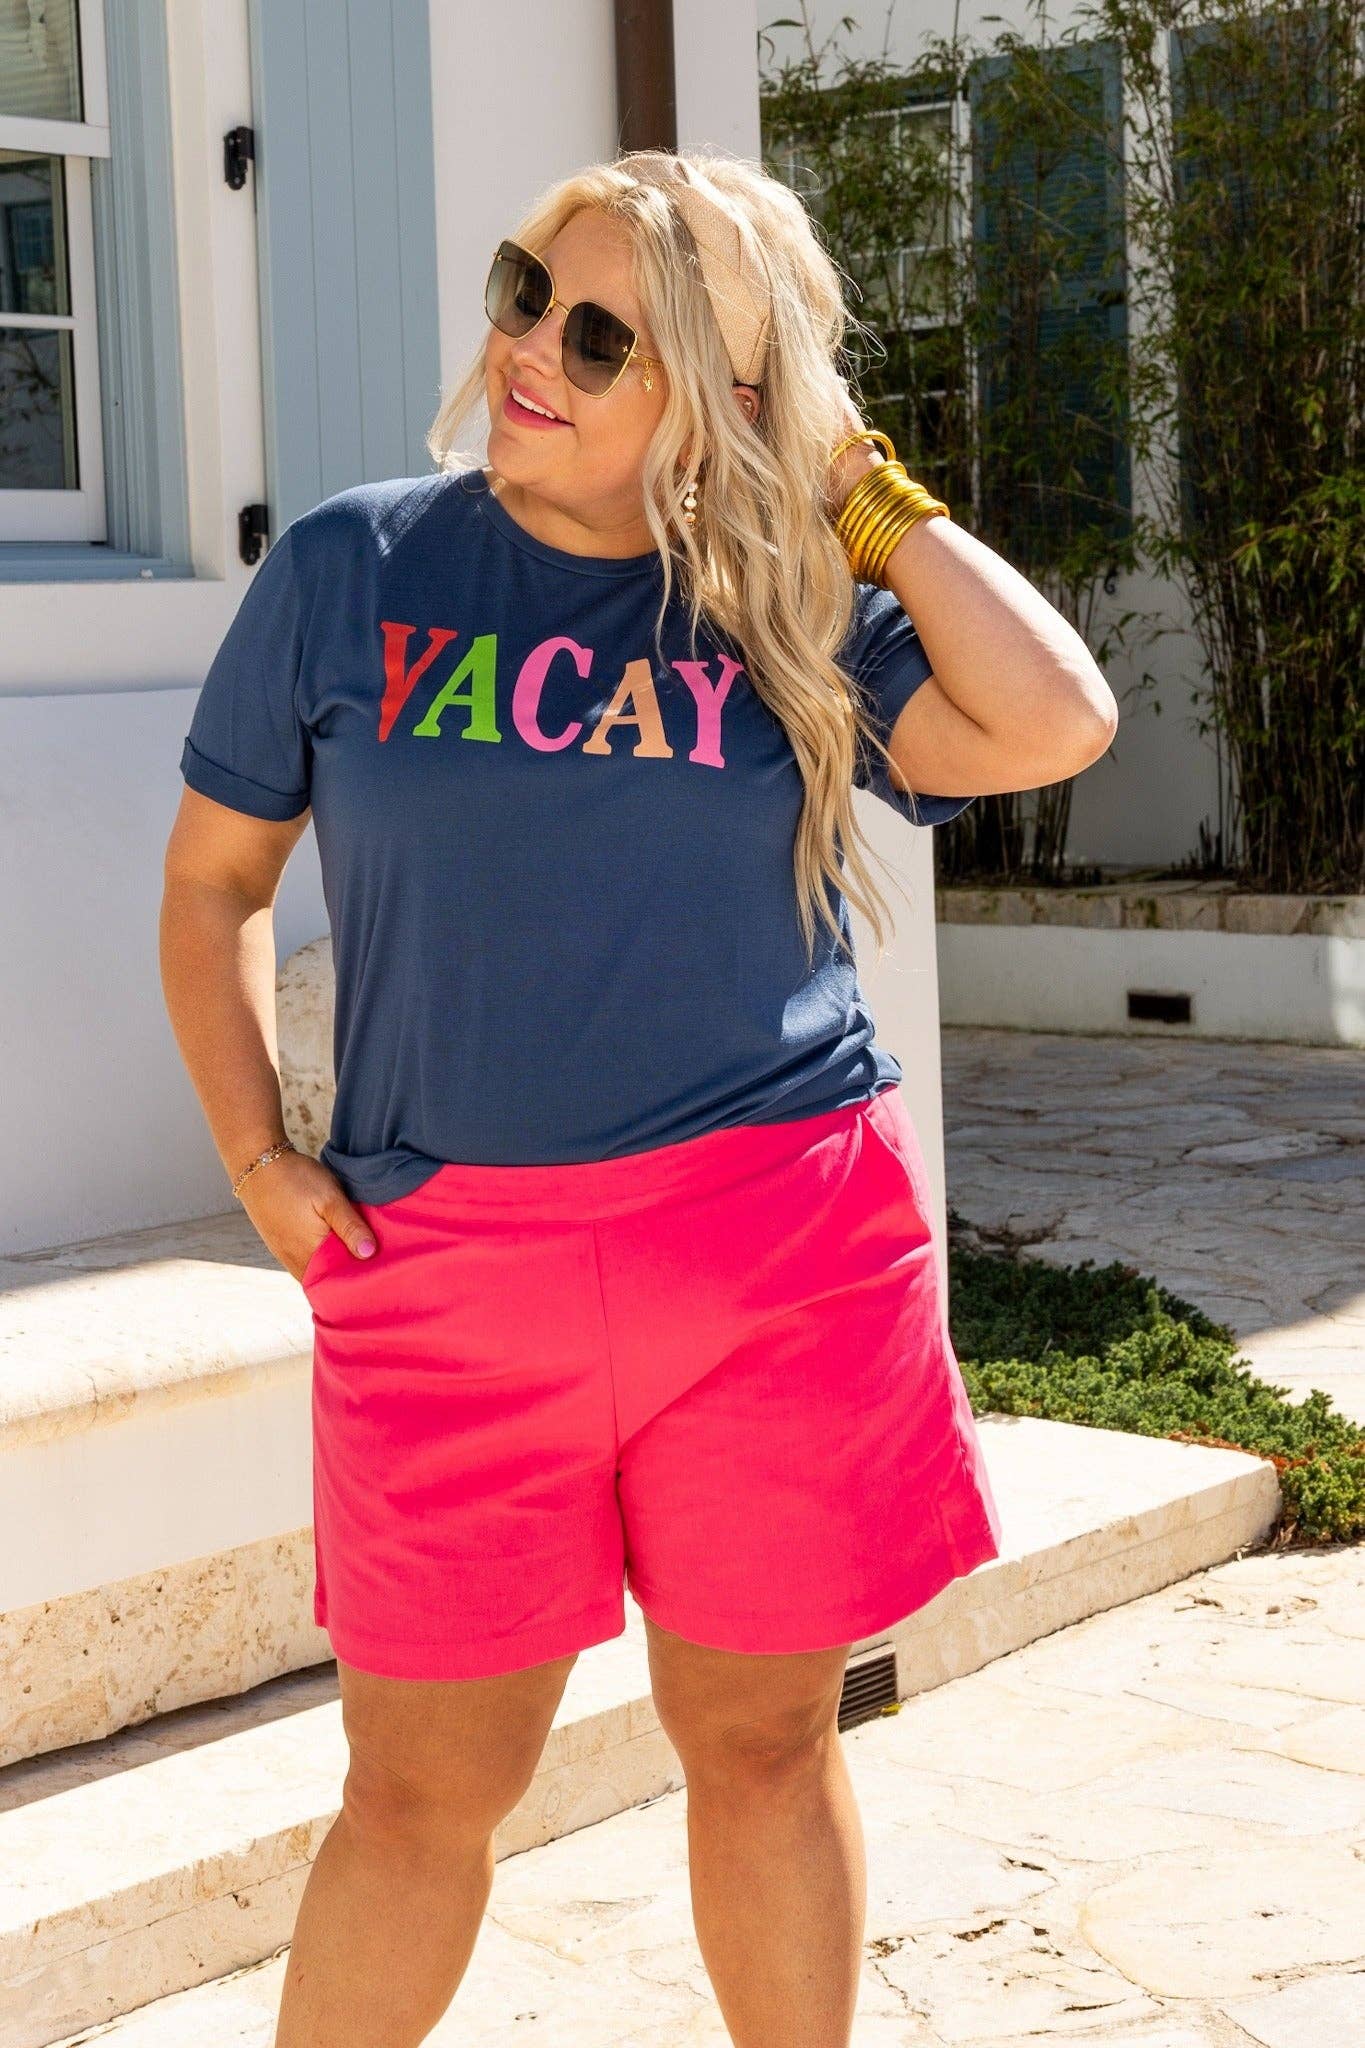 Southern Grace - The Vacay on Navy Crewneck Cuff Tee – Sail Away in Playful Comfort